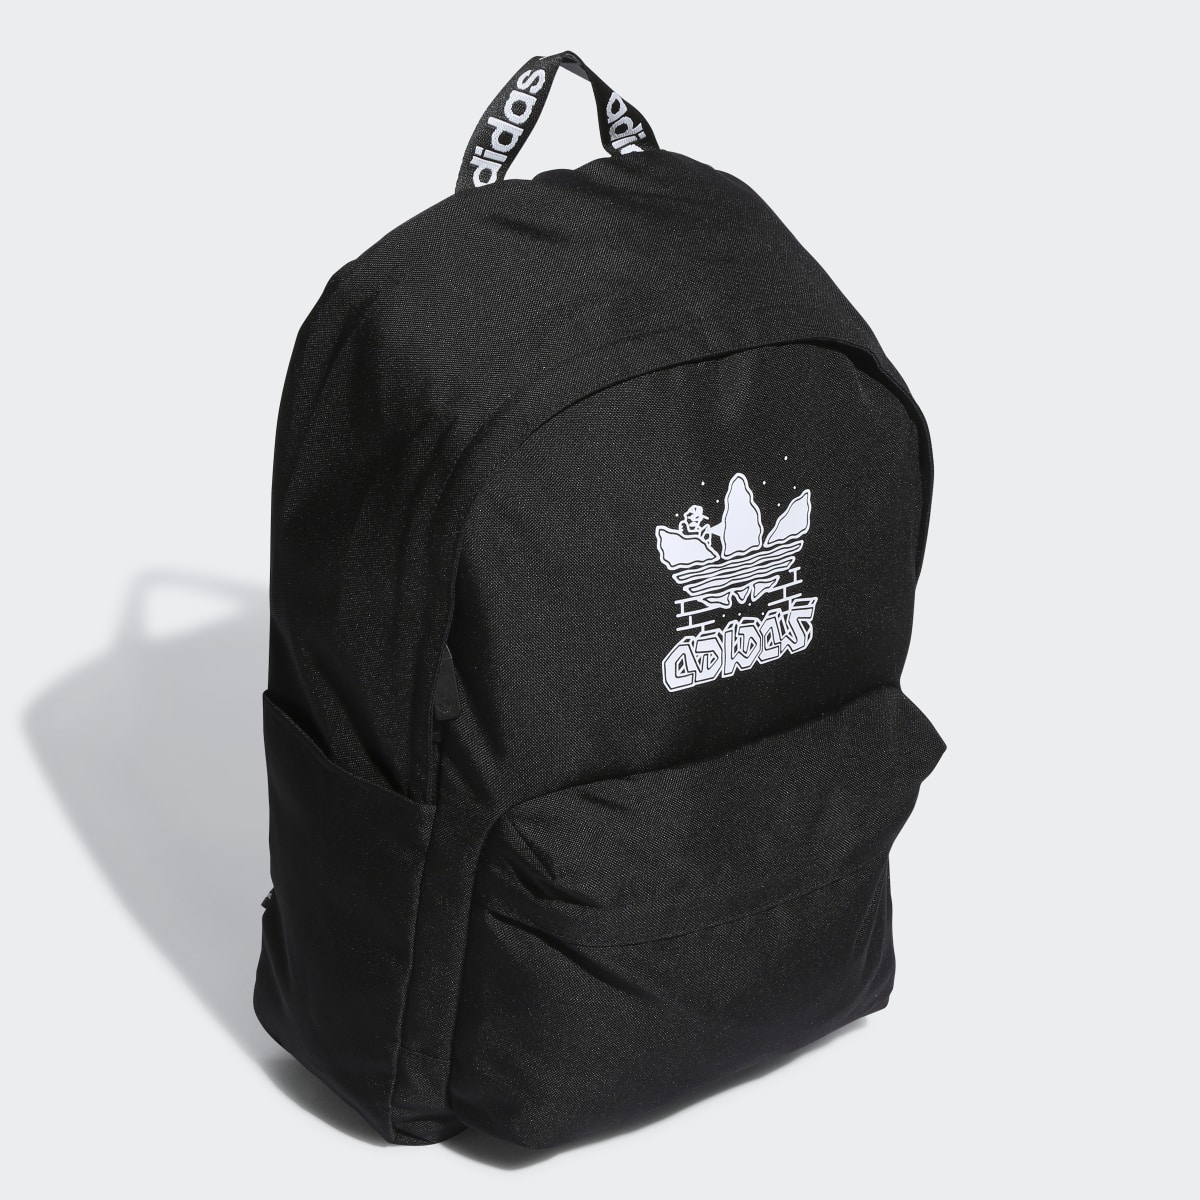 Adidas Trefoil Classic Backpack. 4